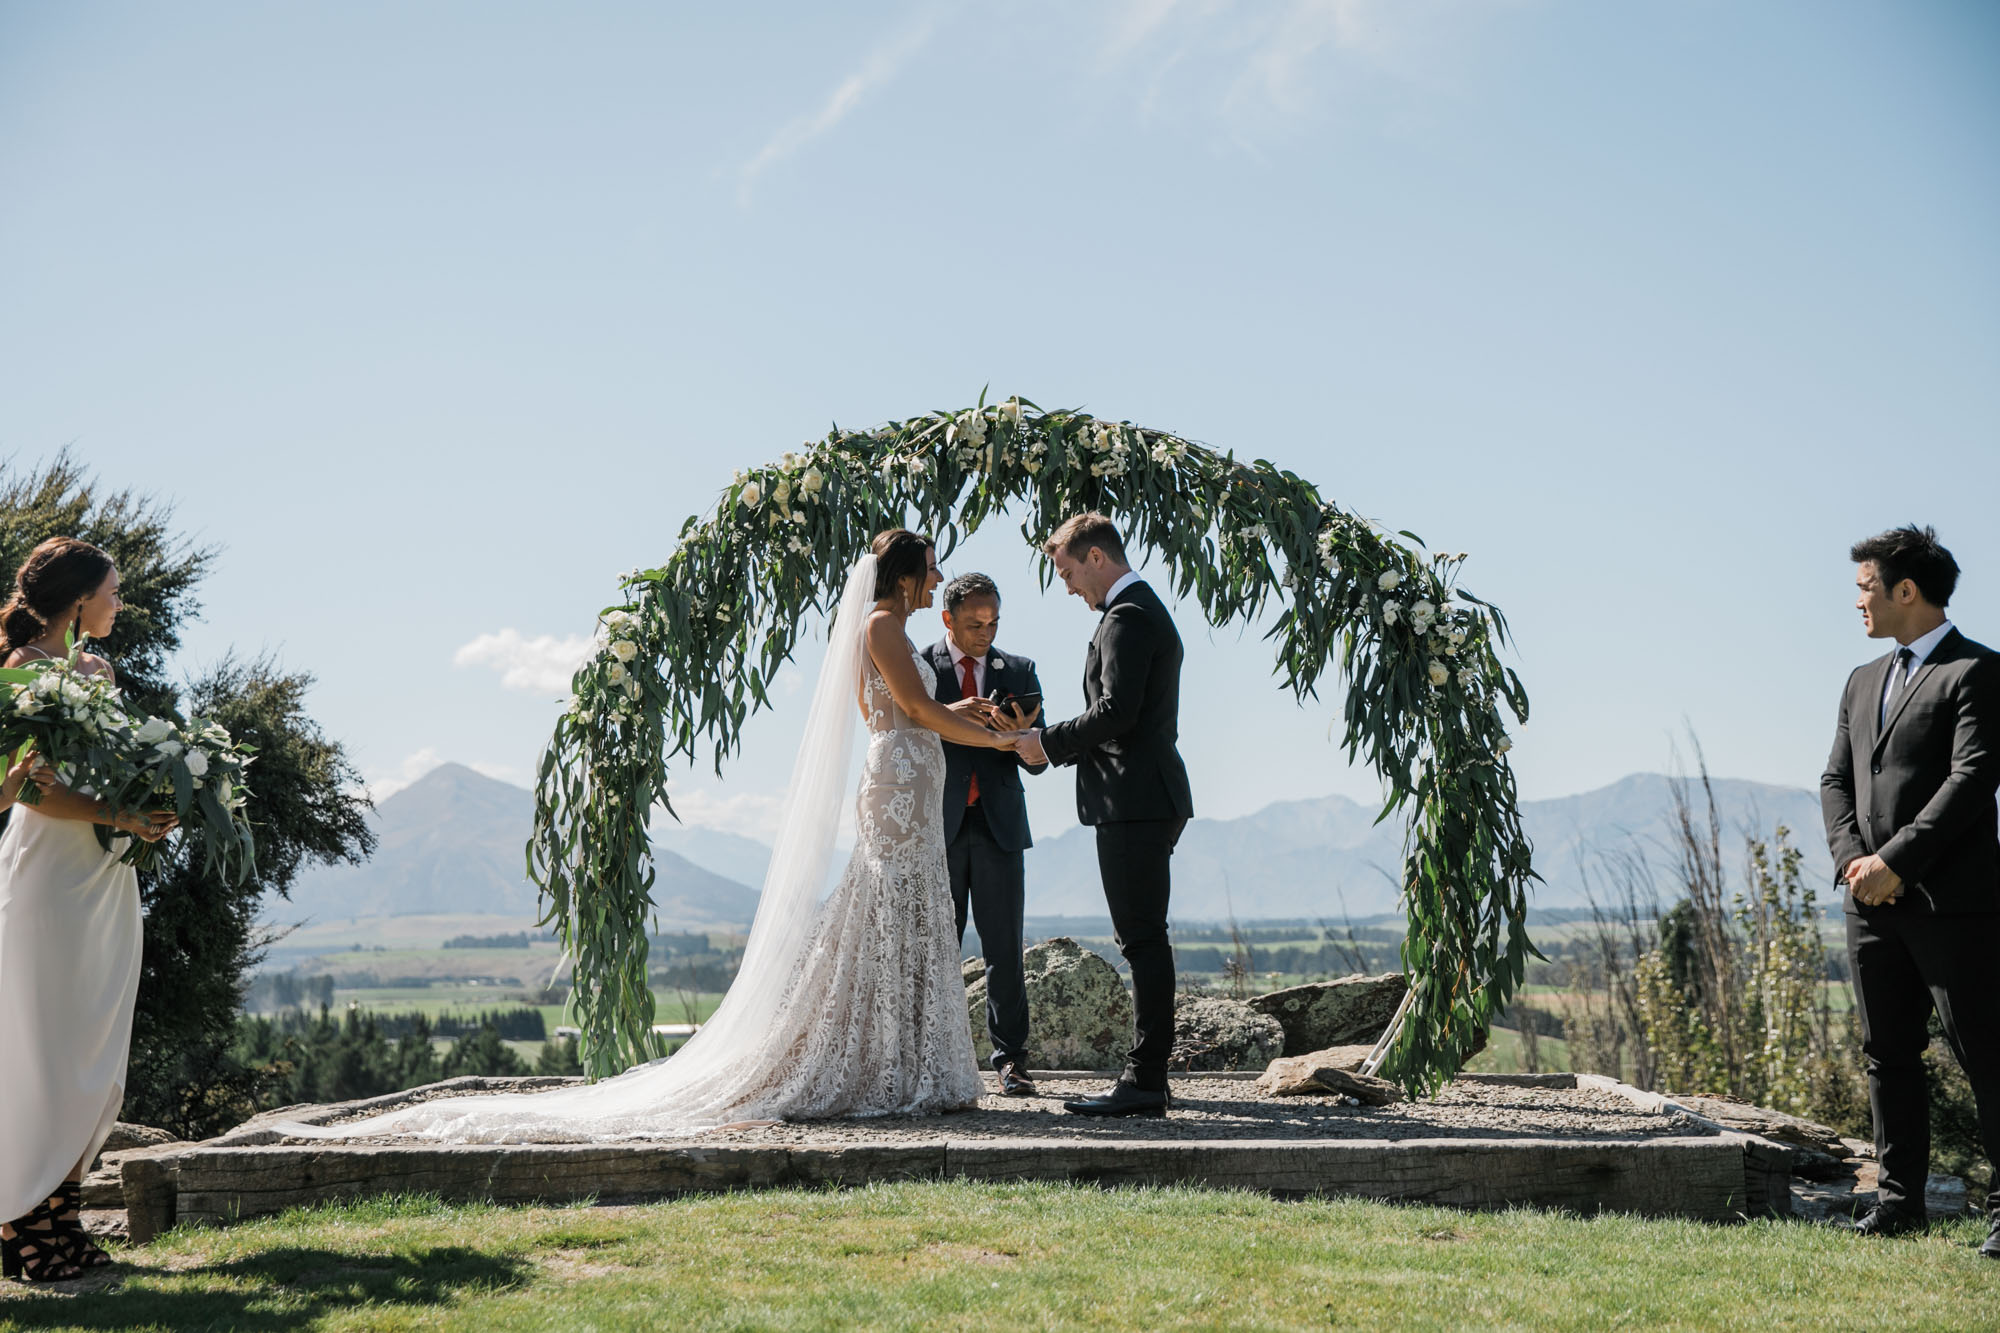 Ceremony Photos At Criffel Woolshed Wedding